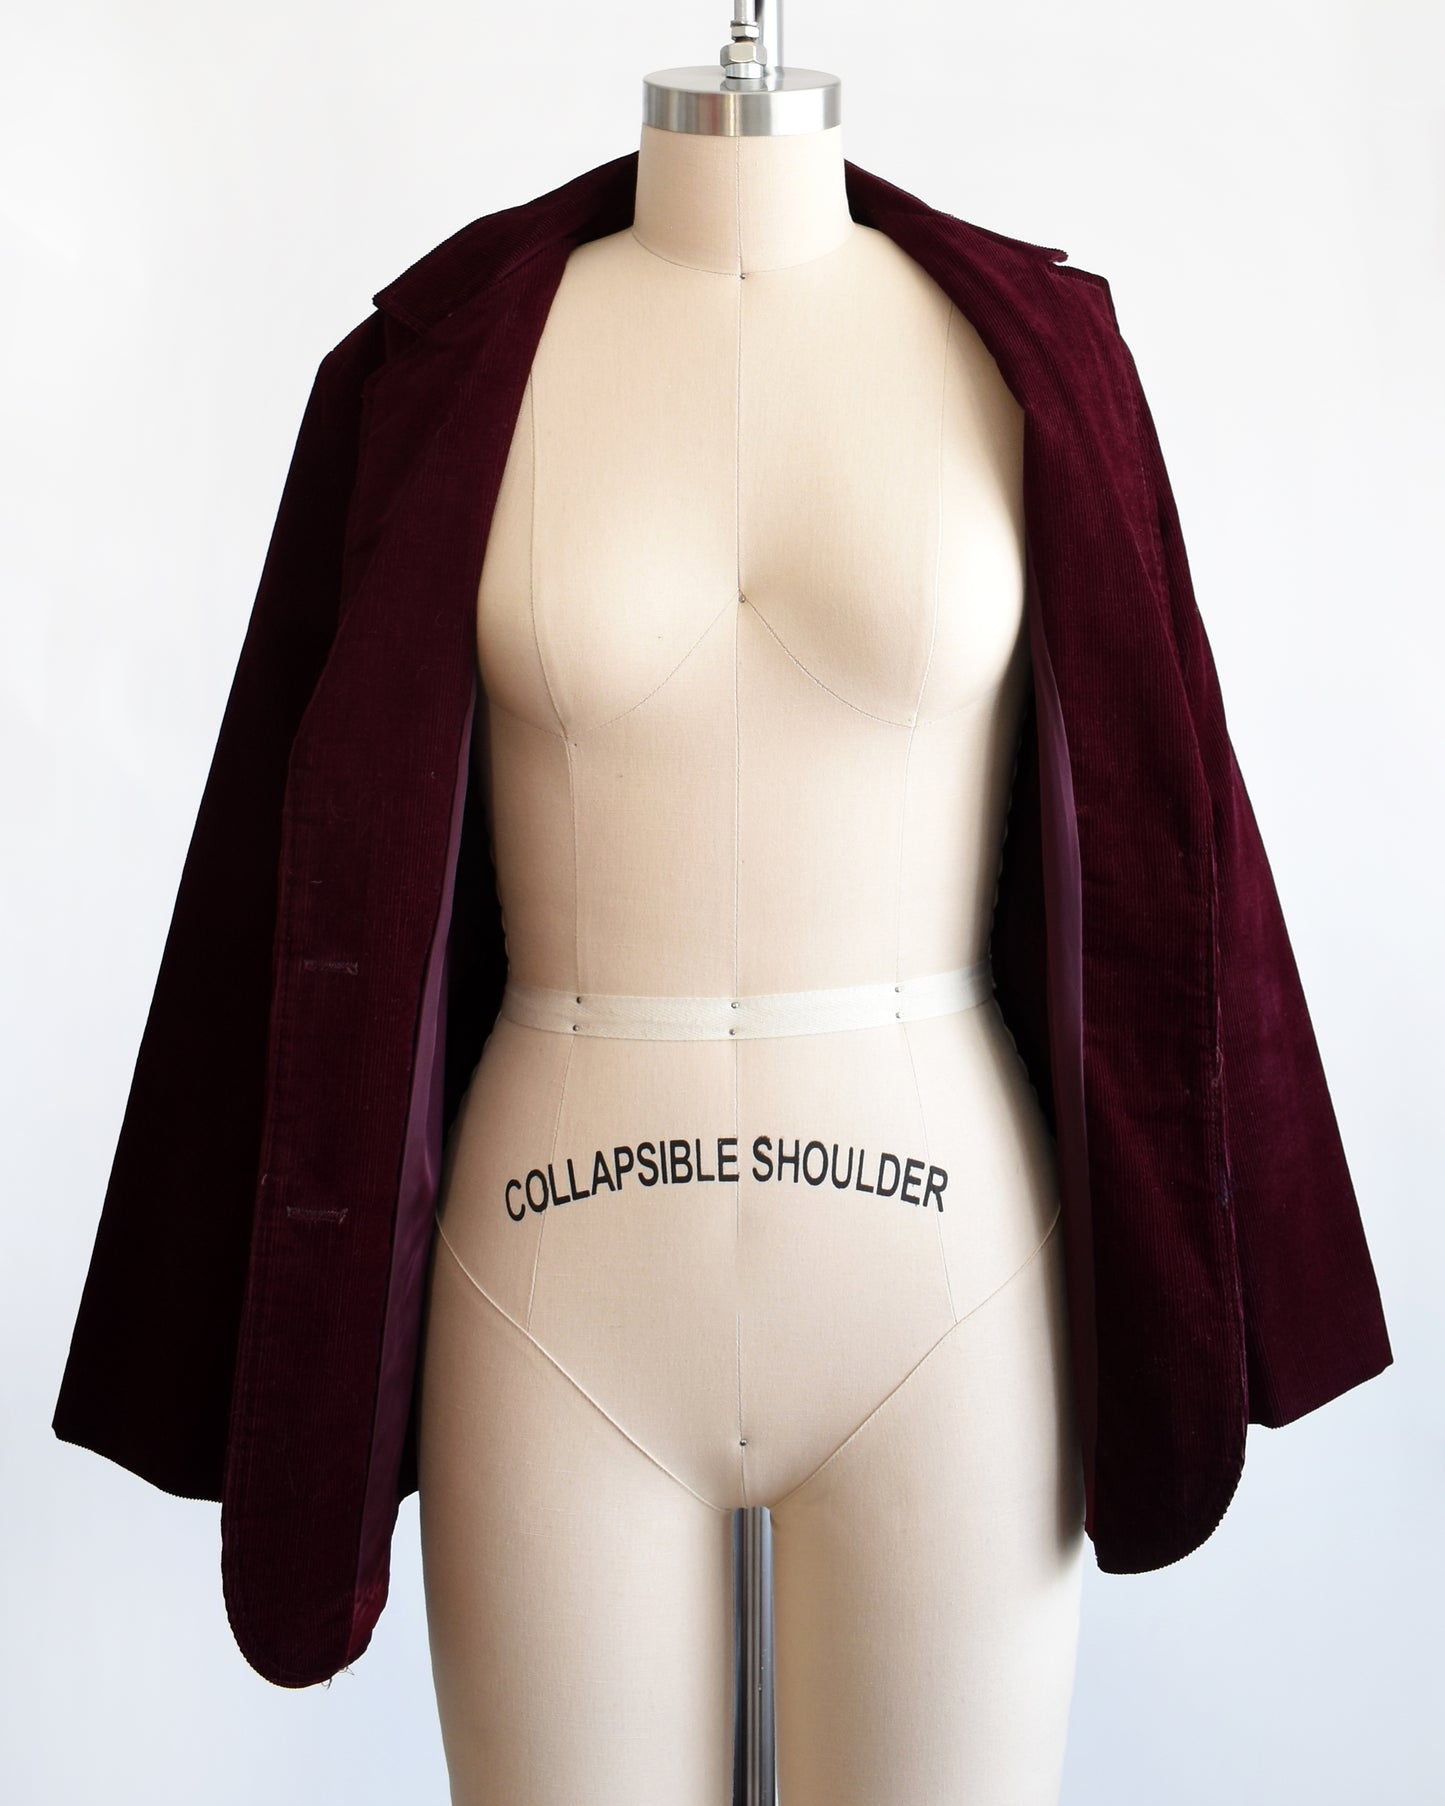 A vintage 1980s burgundy blazer which is open showing the matching lining